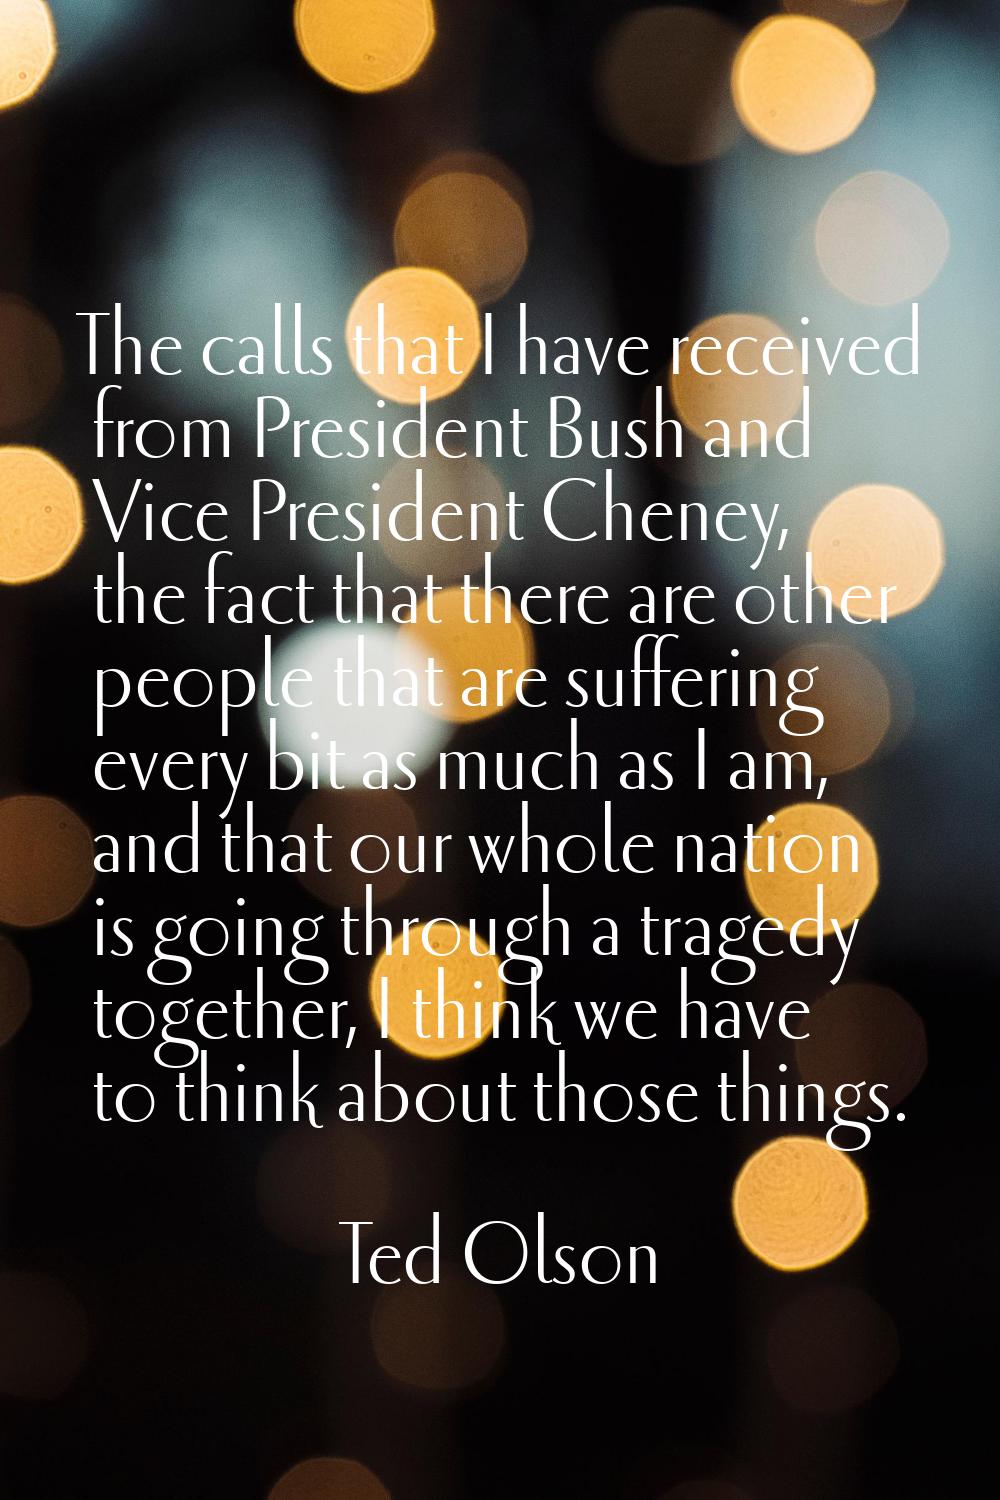 The calls that I have received from President Bush and Vice President Cheney, the fact that there a